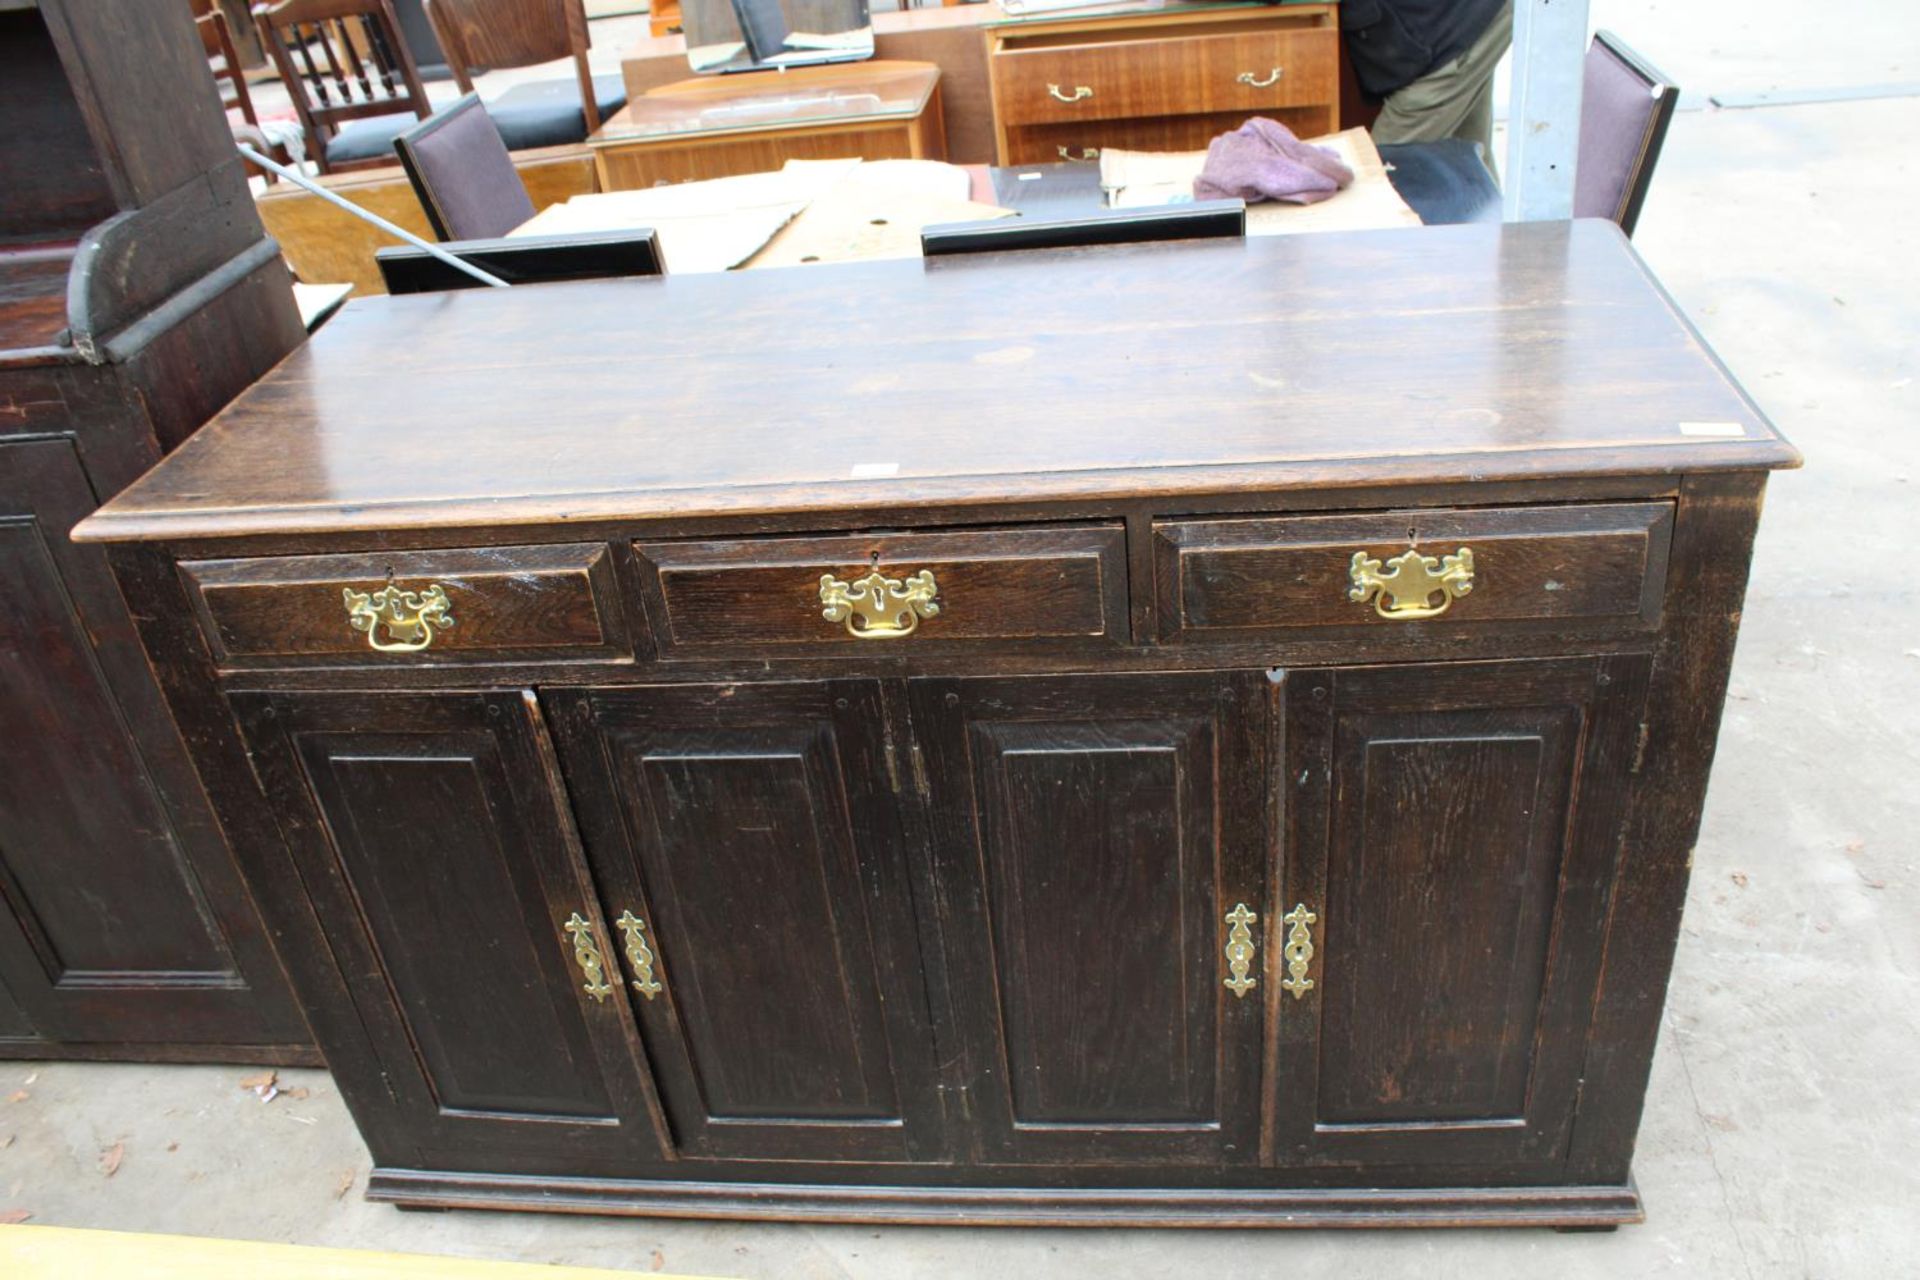 AN OAK GEORGE III STYLE DRESSER WITH FOUR CUPBOARDS AND THREE DRAWERS AND BRASS HANDLES, 60" WIDE